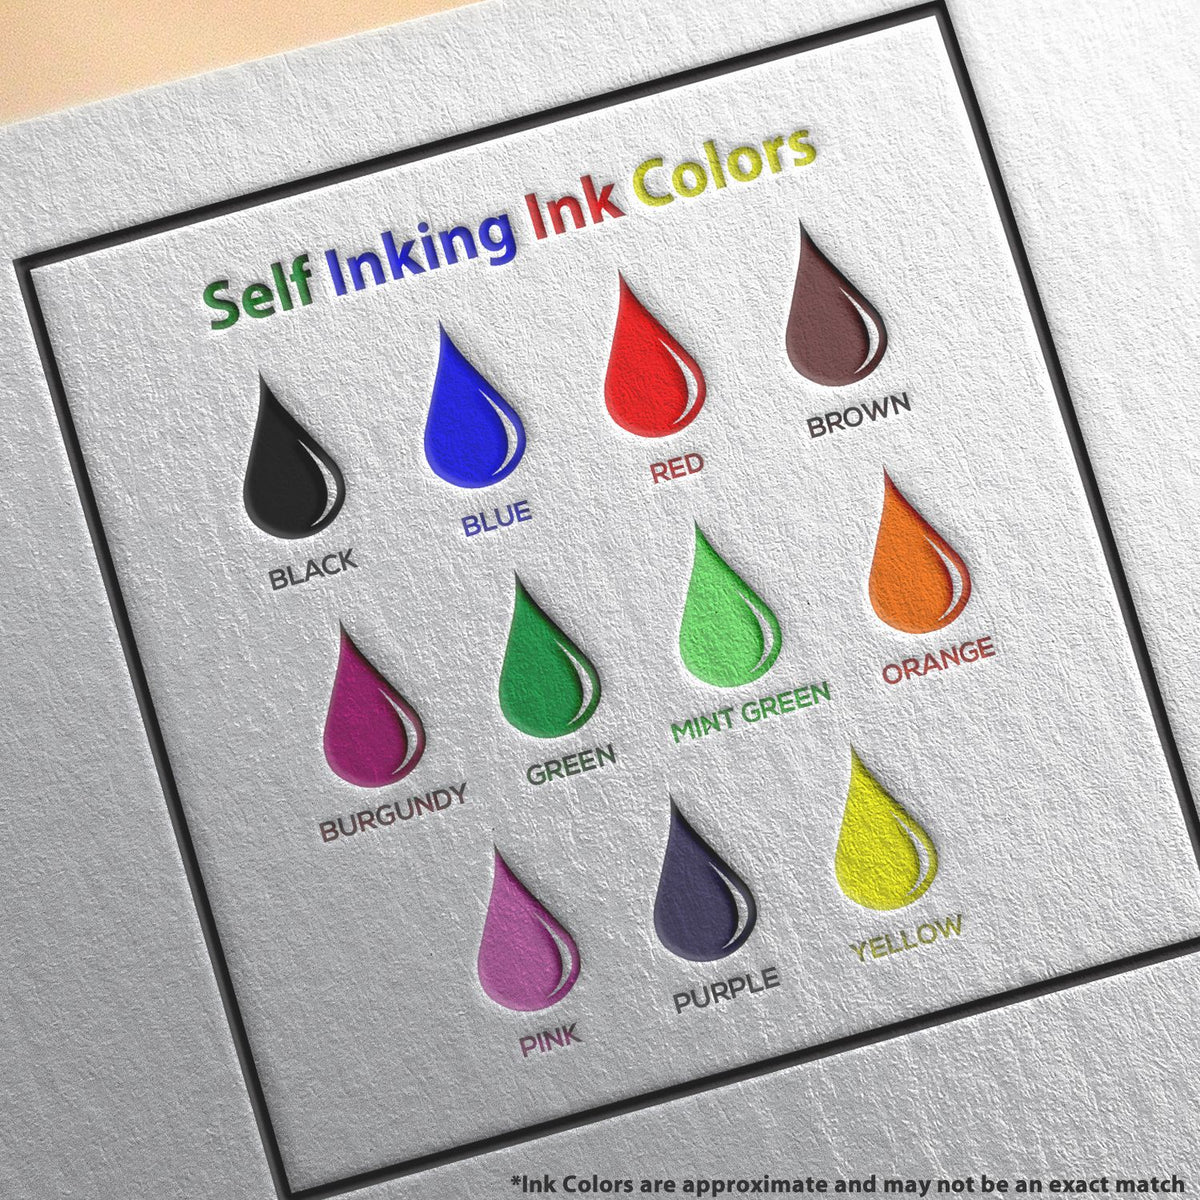 A picture showing the different ink colors or hues available for the Self-Inking Texas PE Stamp product.